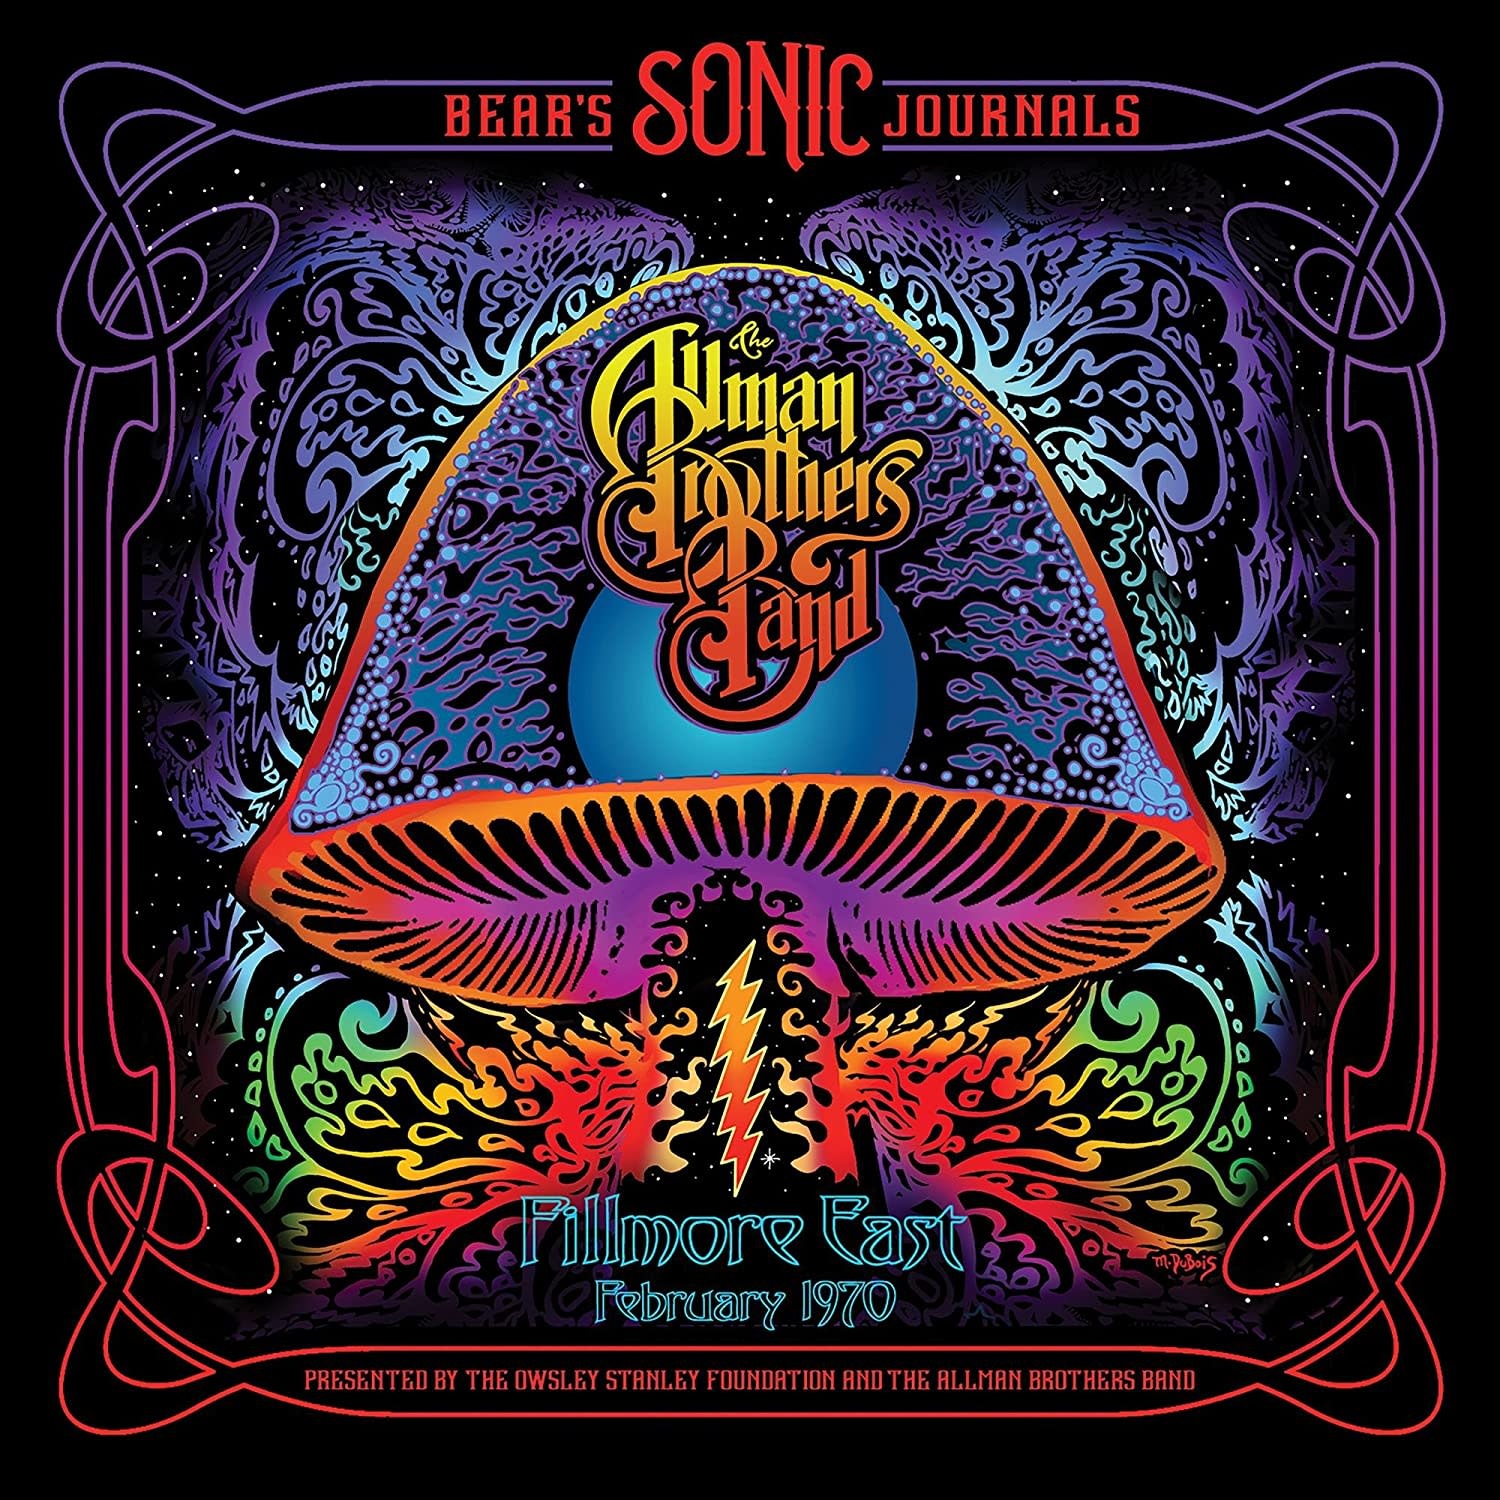 Allman Brothers Band - Sonic Journals: Fillmore East (Pink Vinyl)